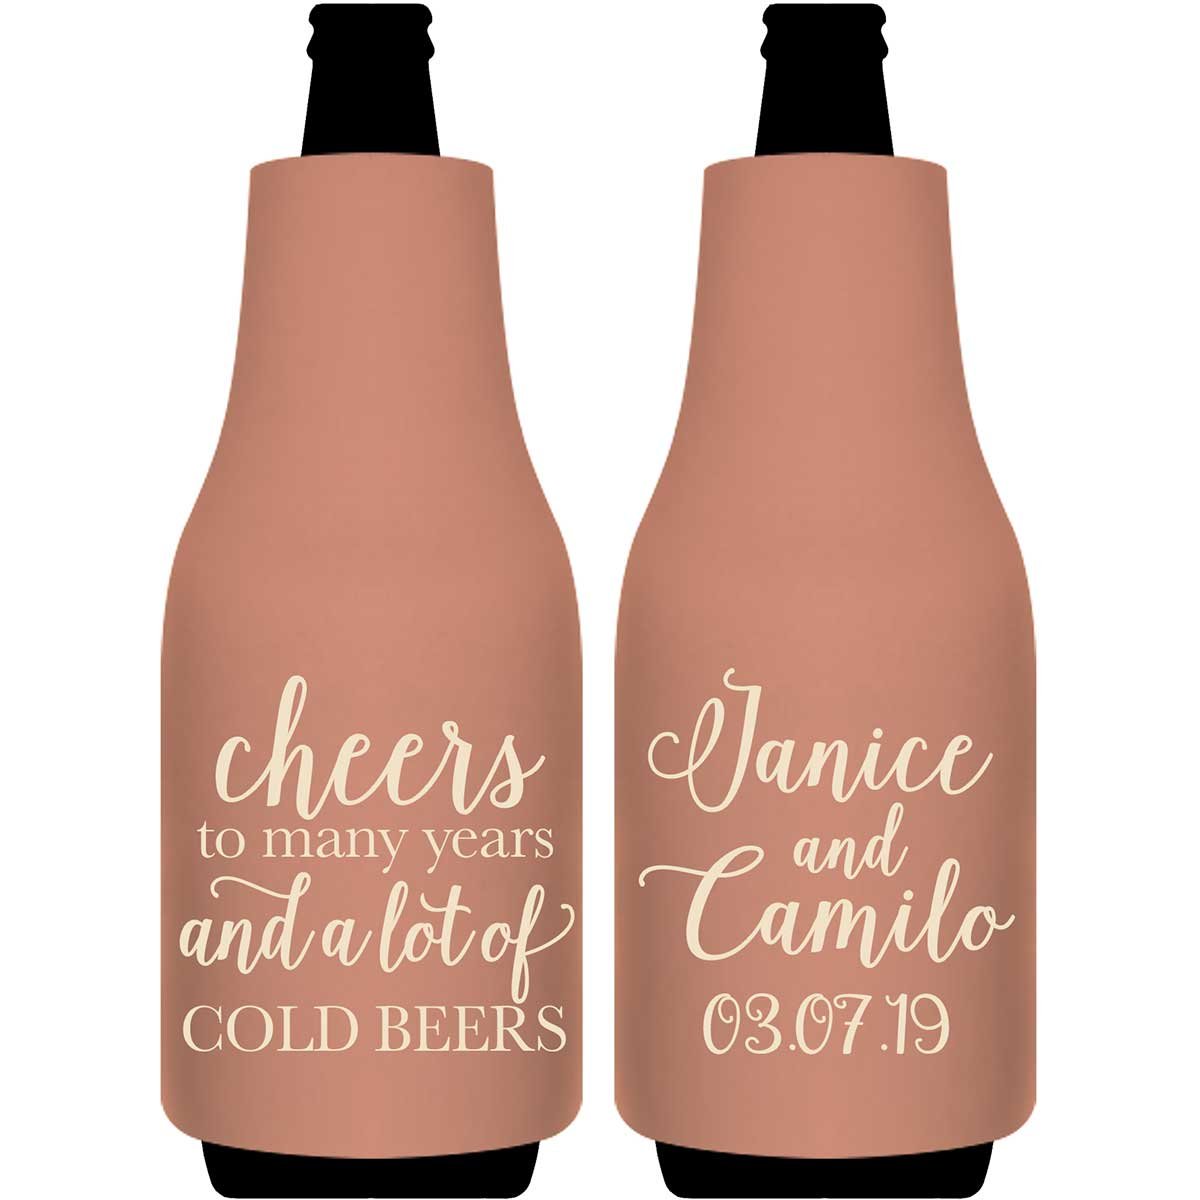 Cheers To Many Years 1A And Lot Of Cold Beers Foldable Bottle Sleeve Koozies Wedding Gifts for Guests